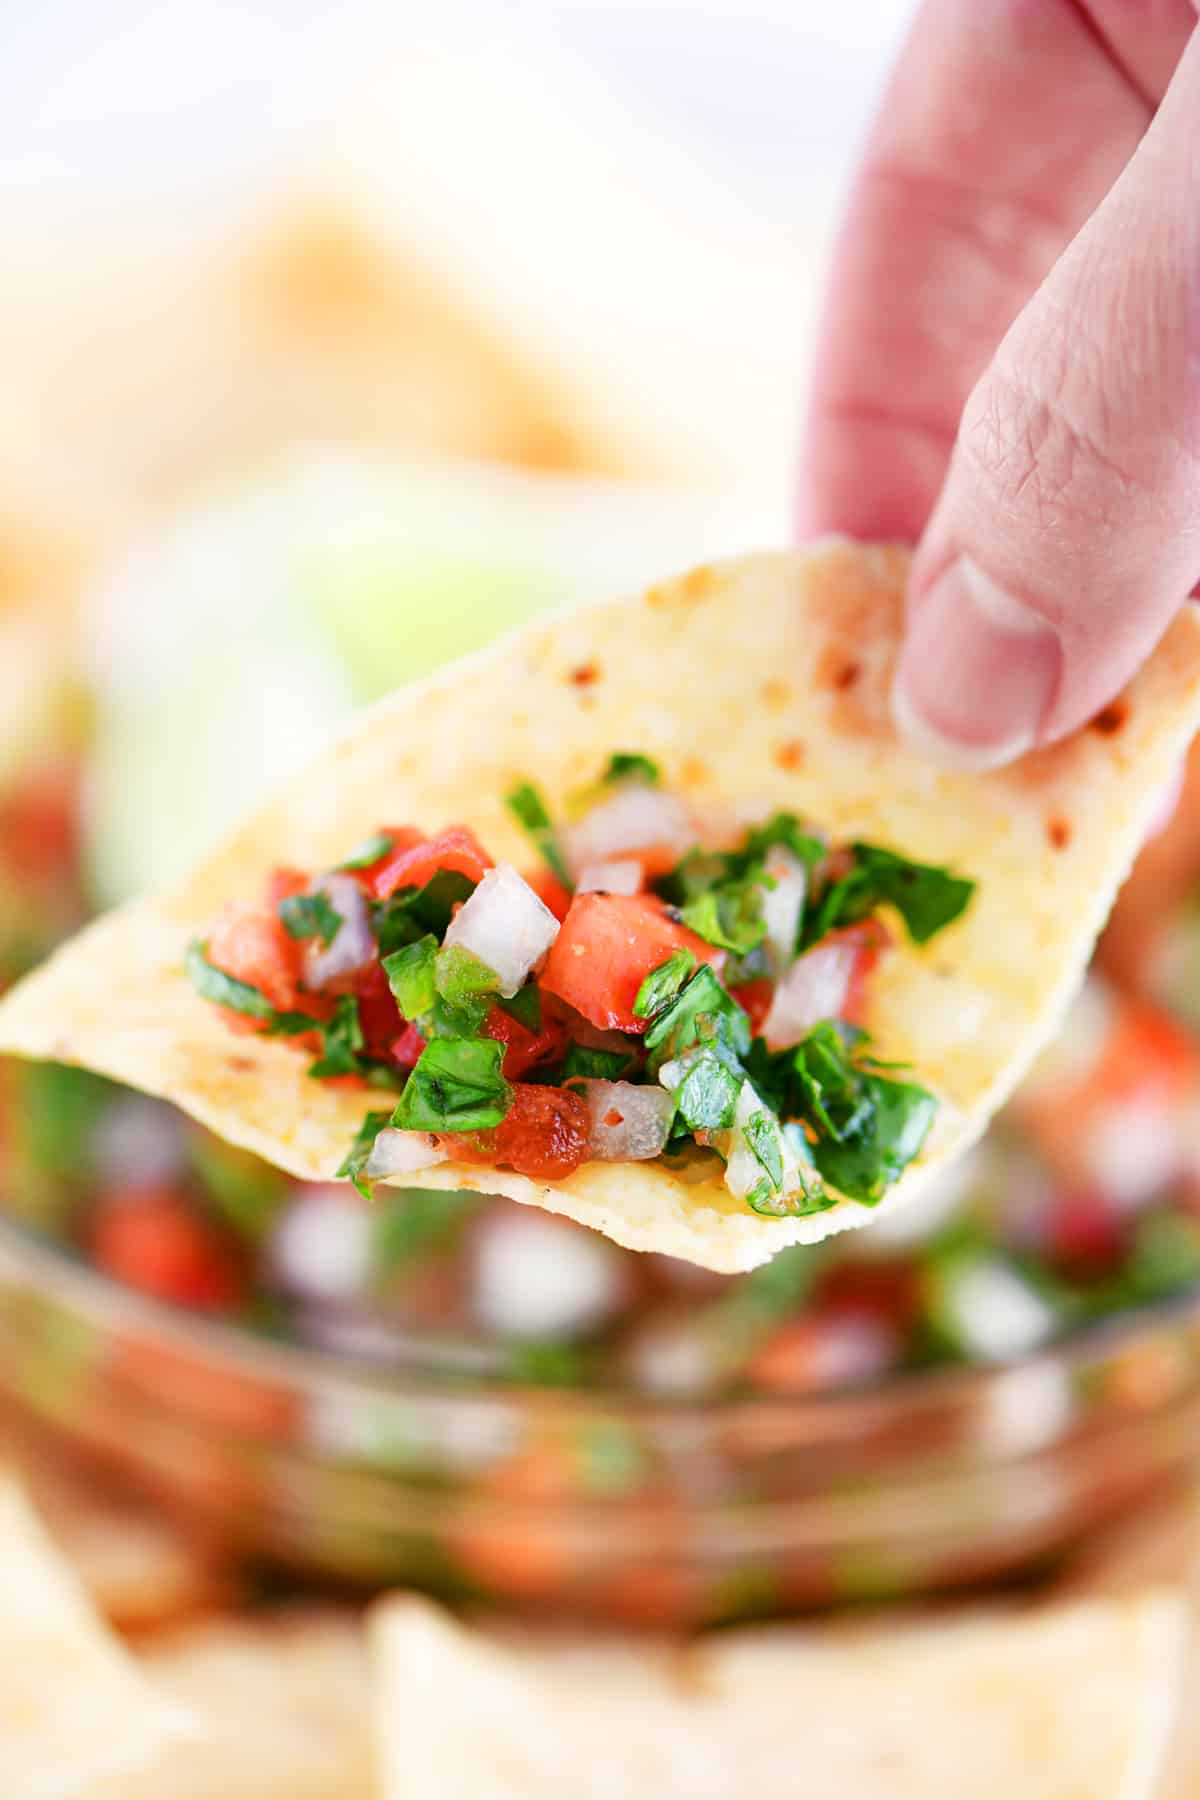 a hand holding a tortilla chip with some pico de gallo on it